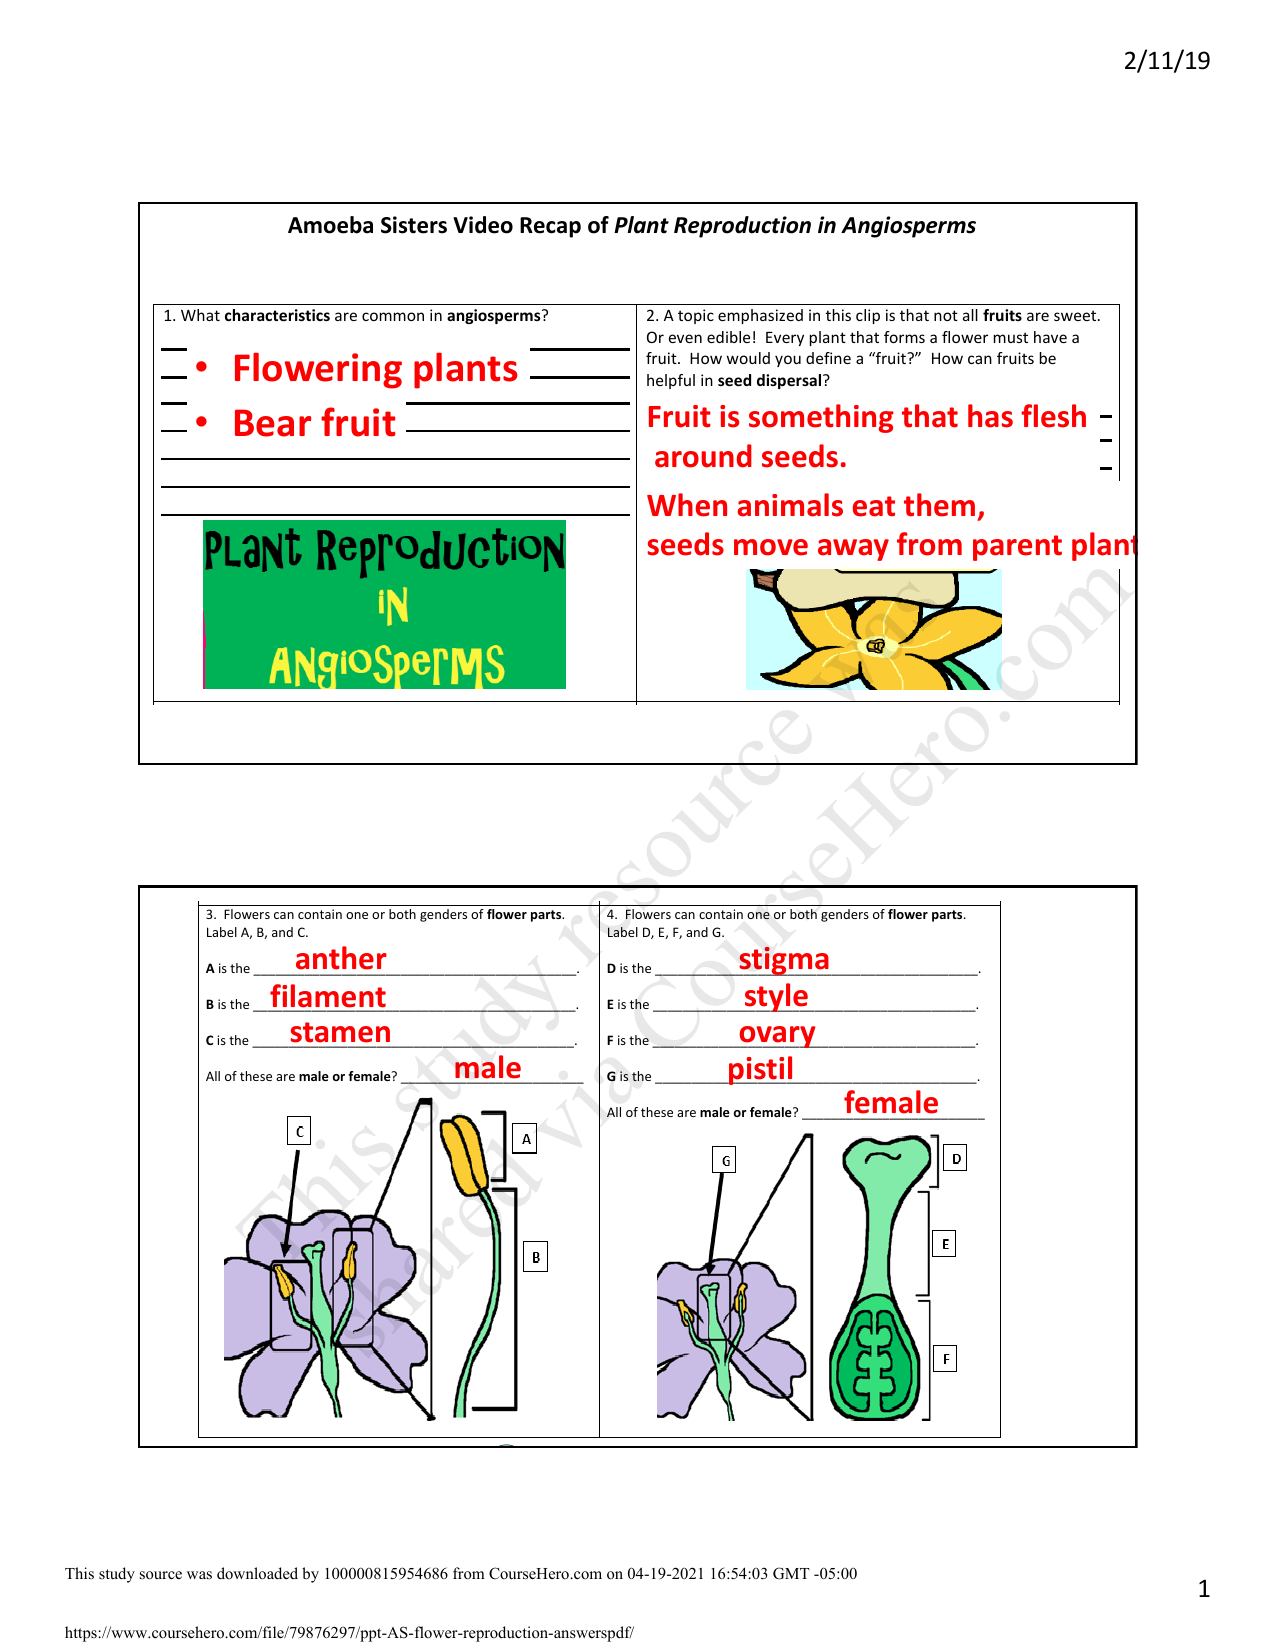 Ppt As Flower Reproduction Answers Pdf